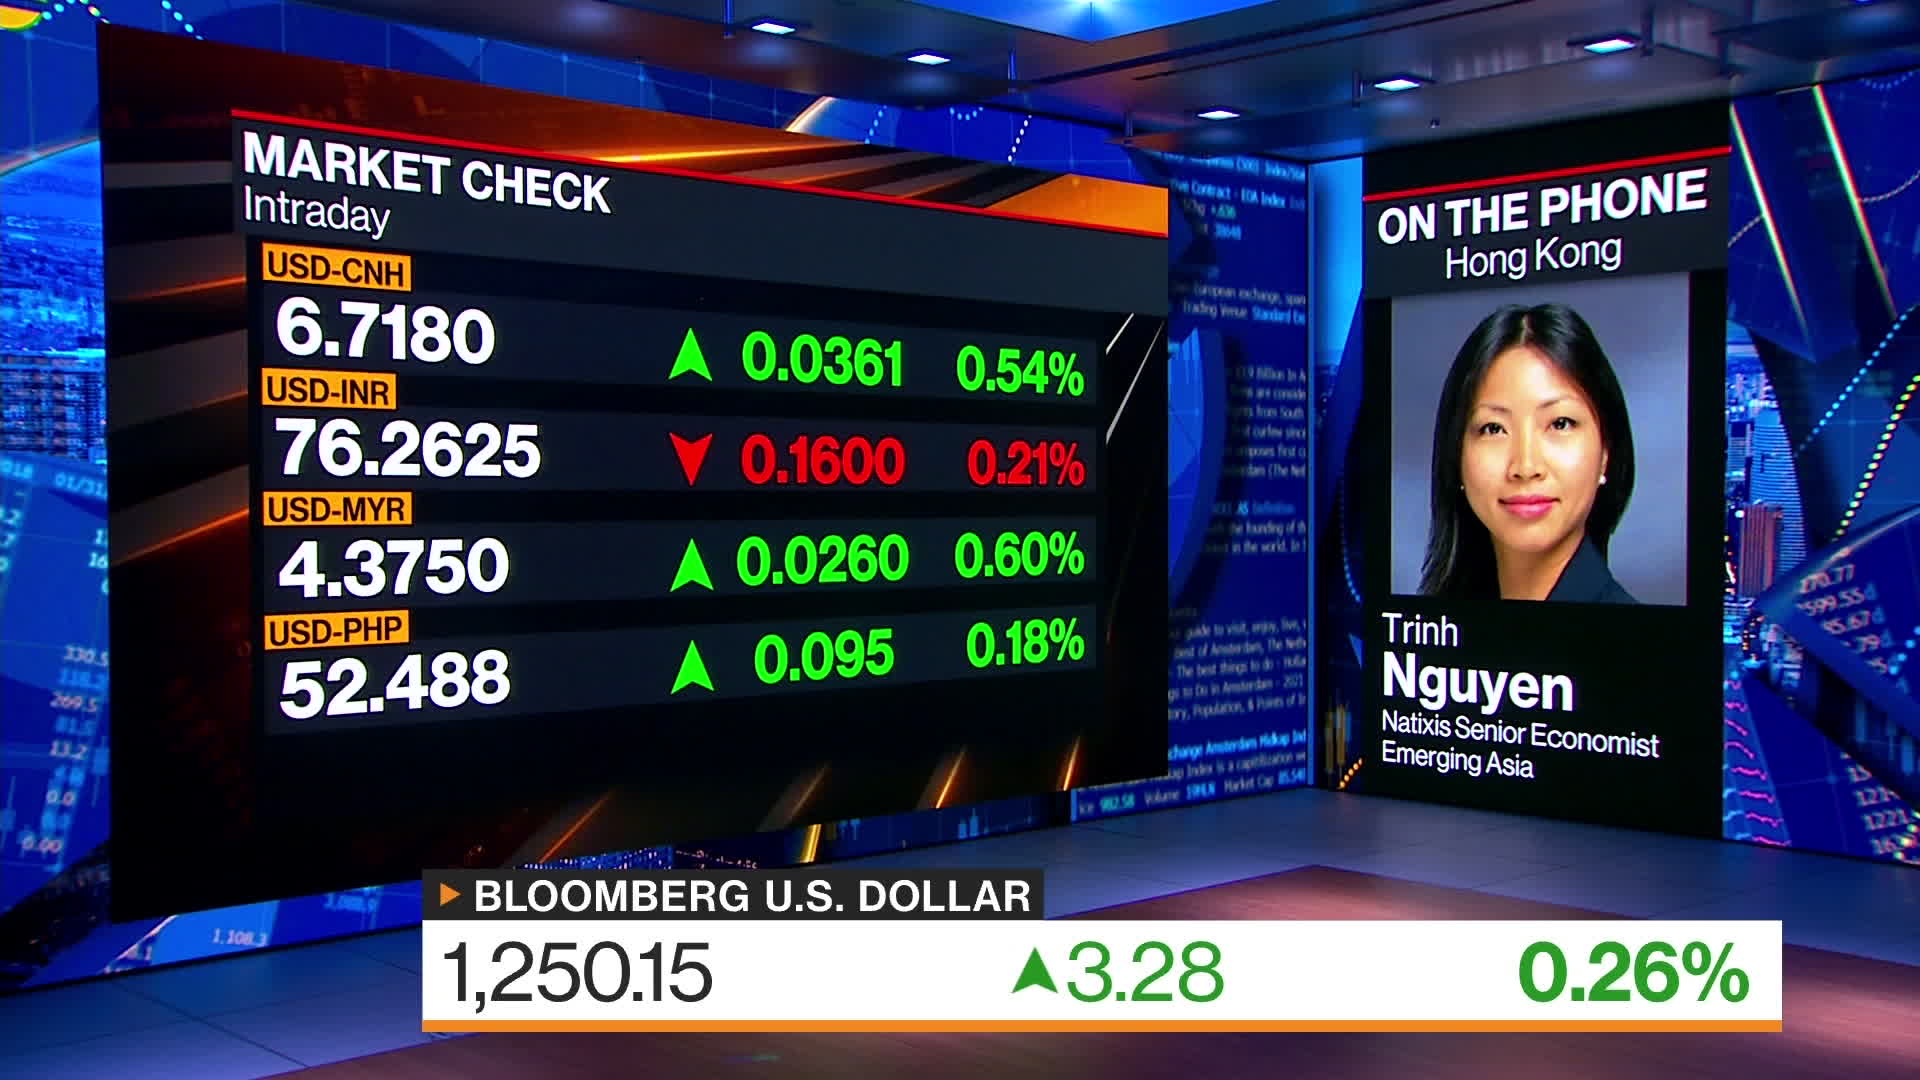 Watch Natixis Trinh Nguyen on EM Policy Rates Outlook - Bloomberg